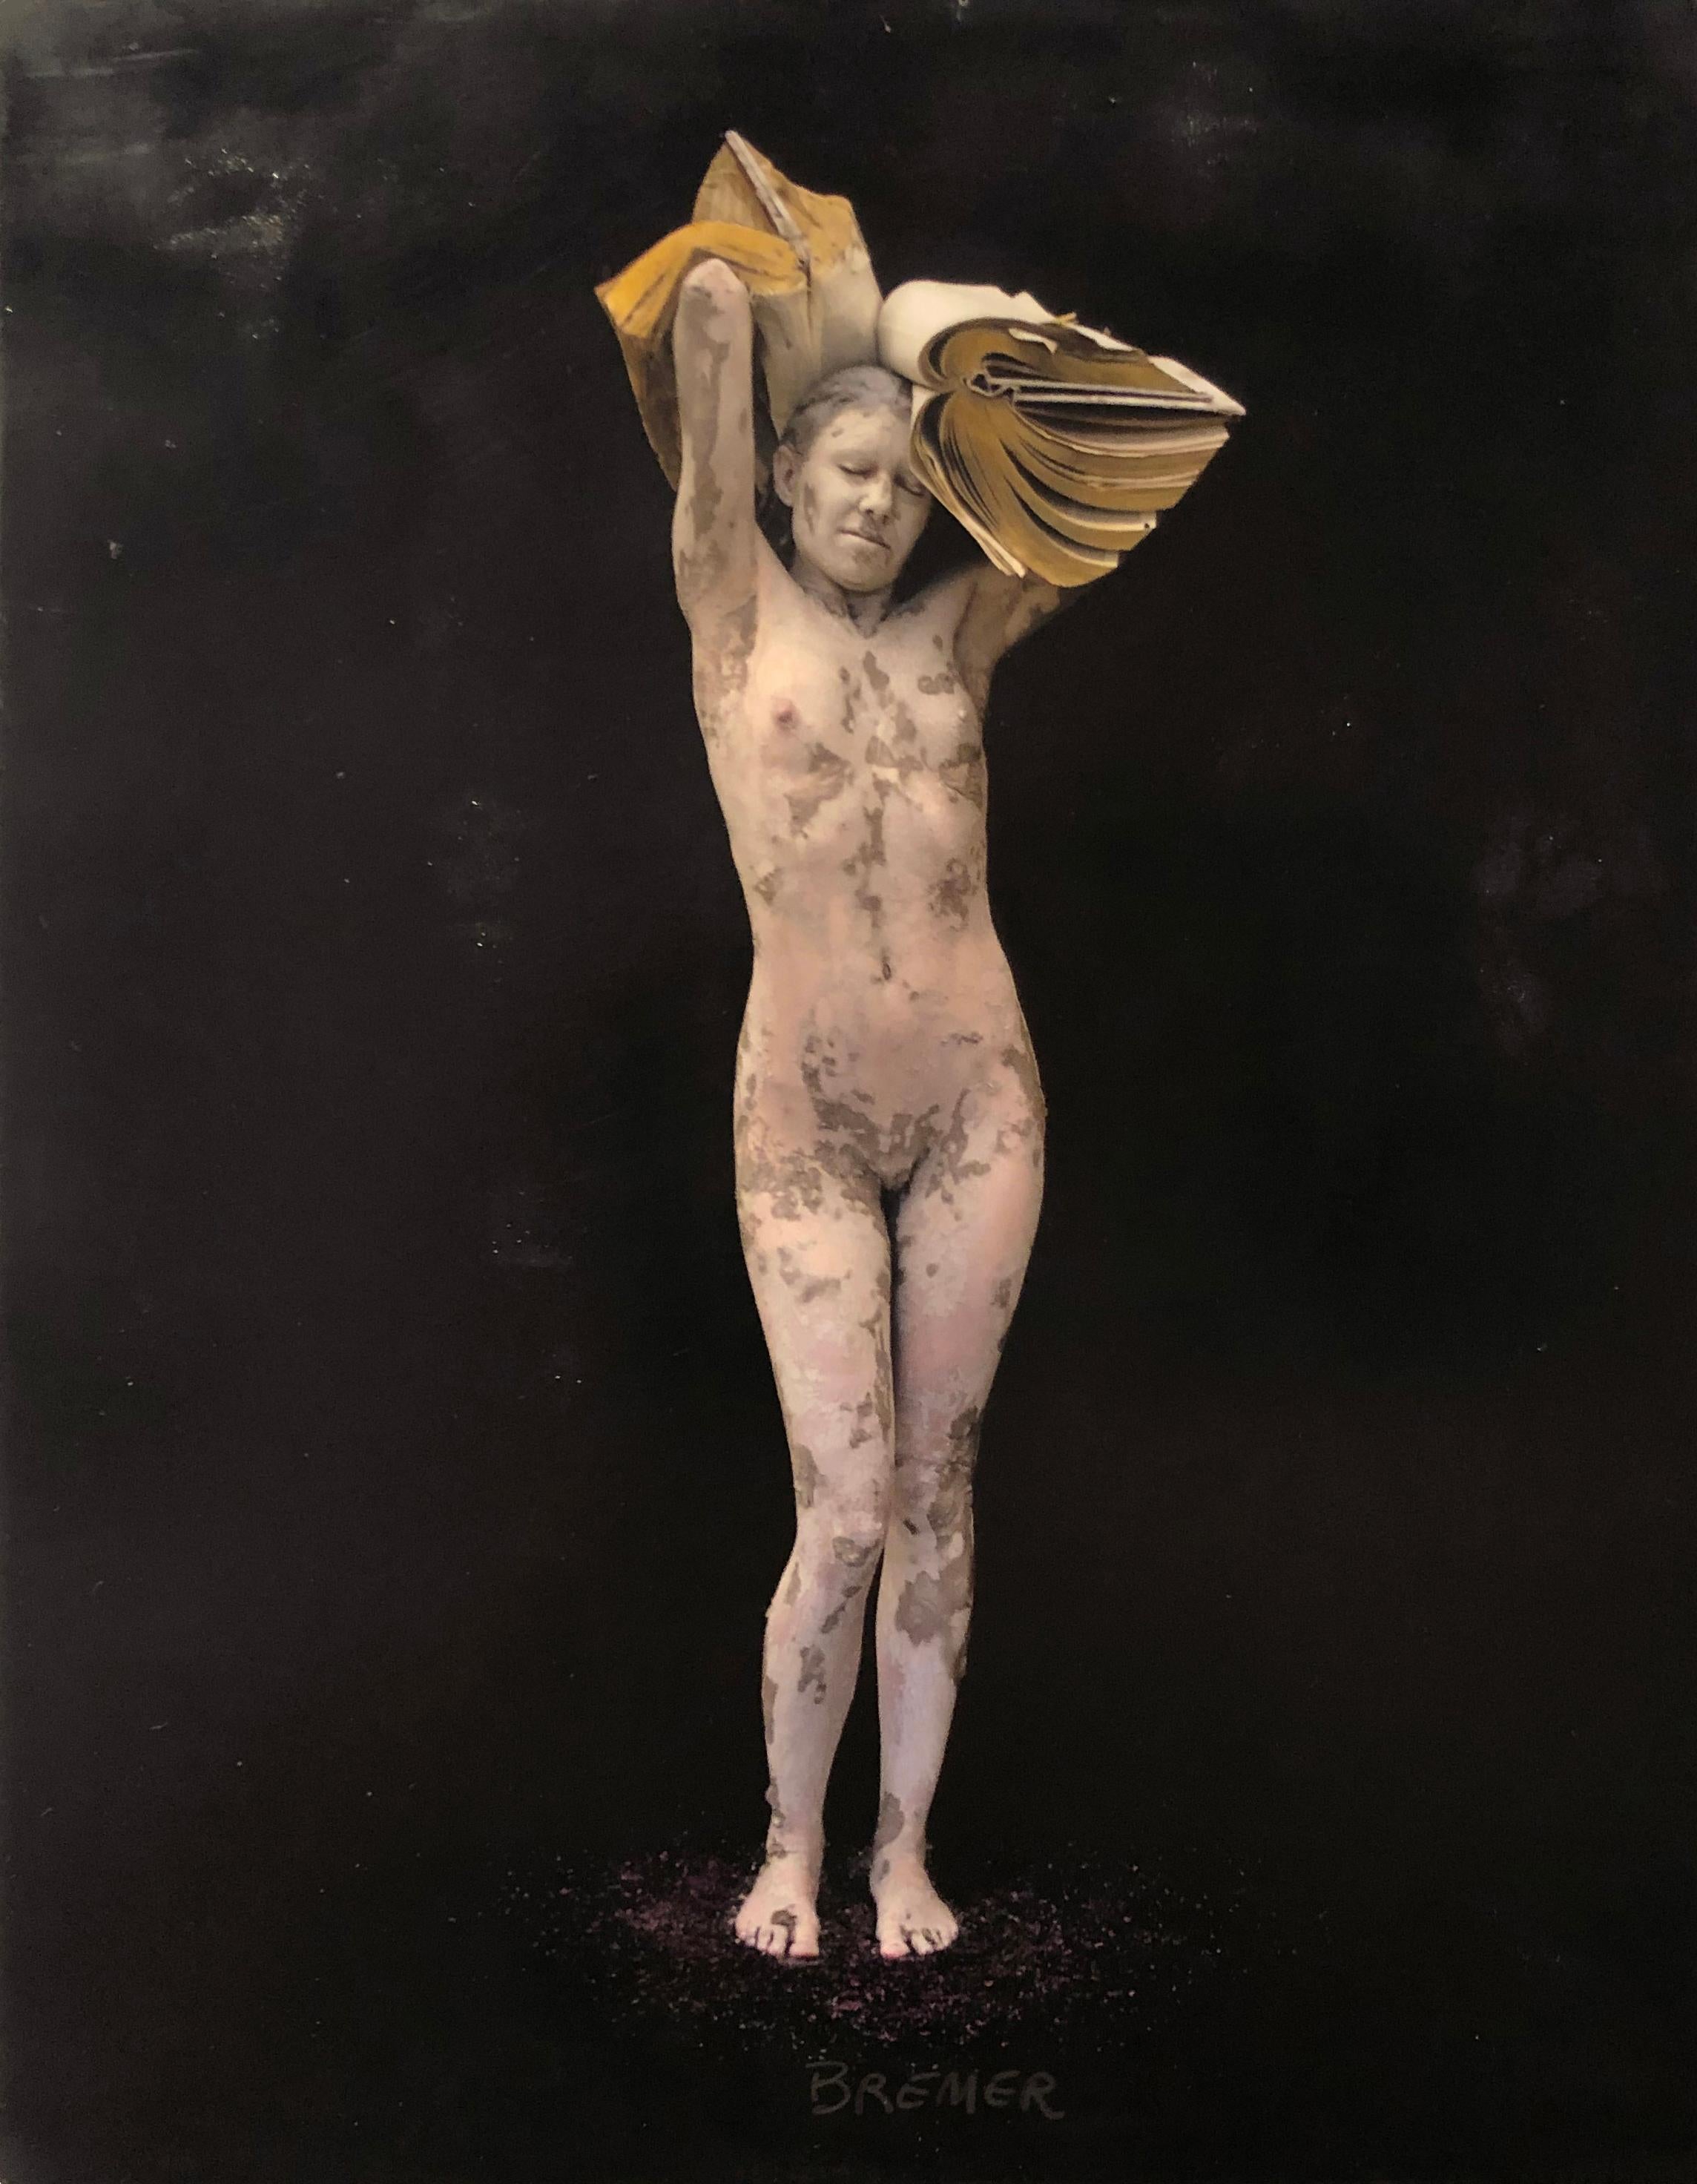 Charles Bremer Figurative Painting - Nude figure with black and purple, "Books of the Future II", encaustic on panel